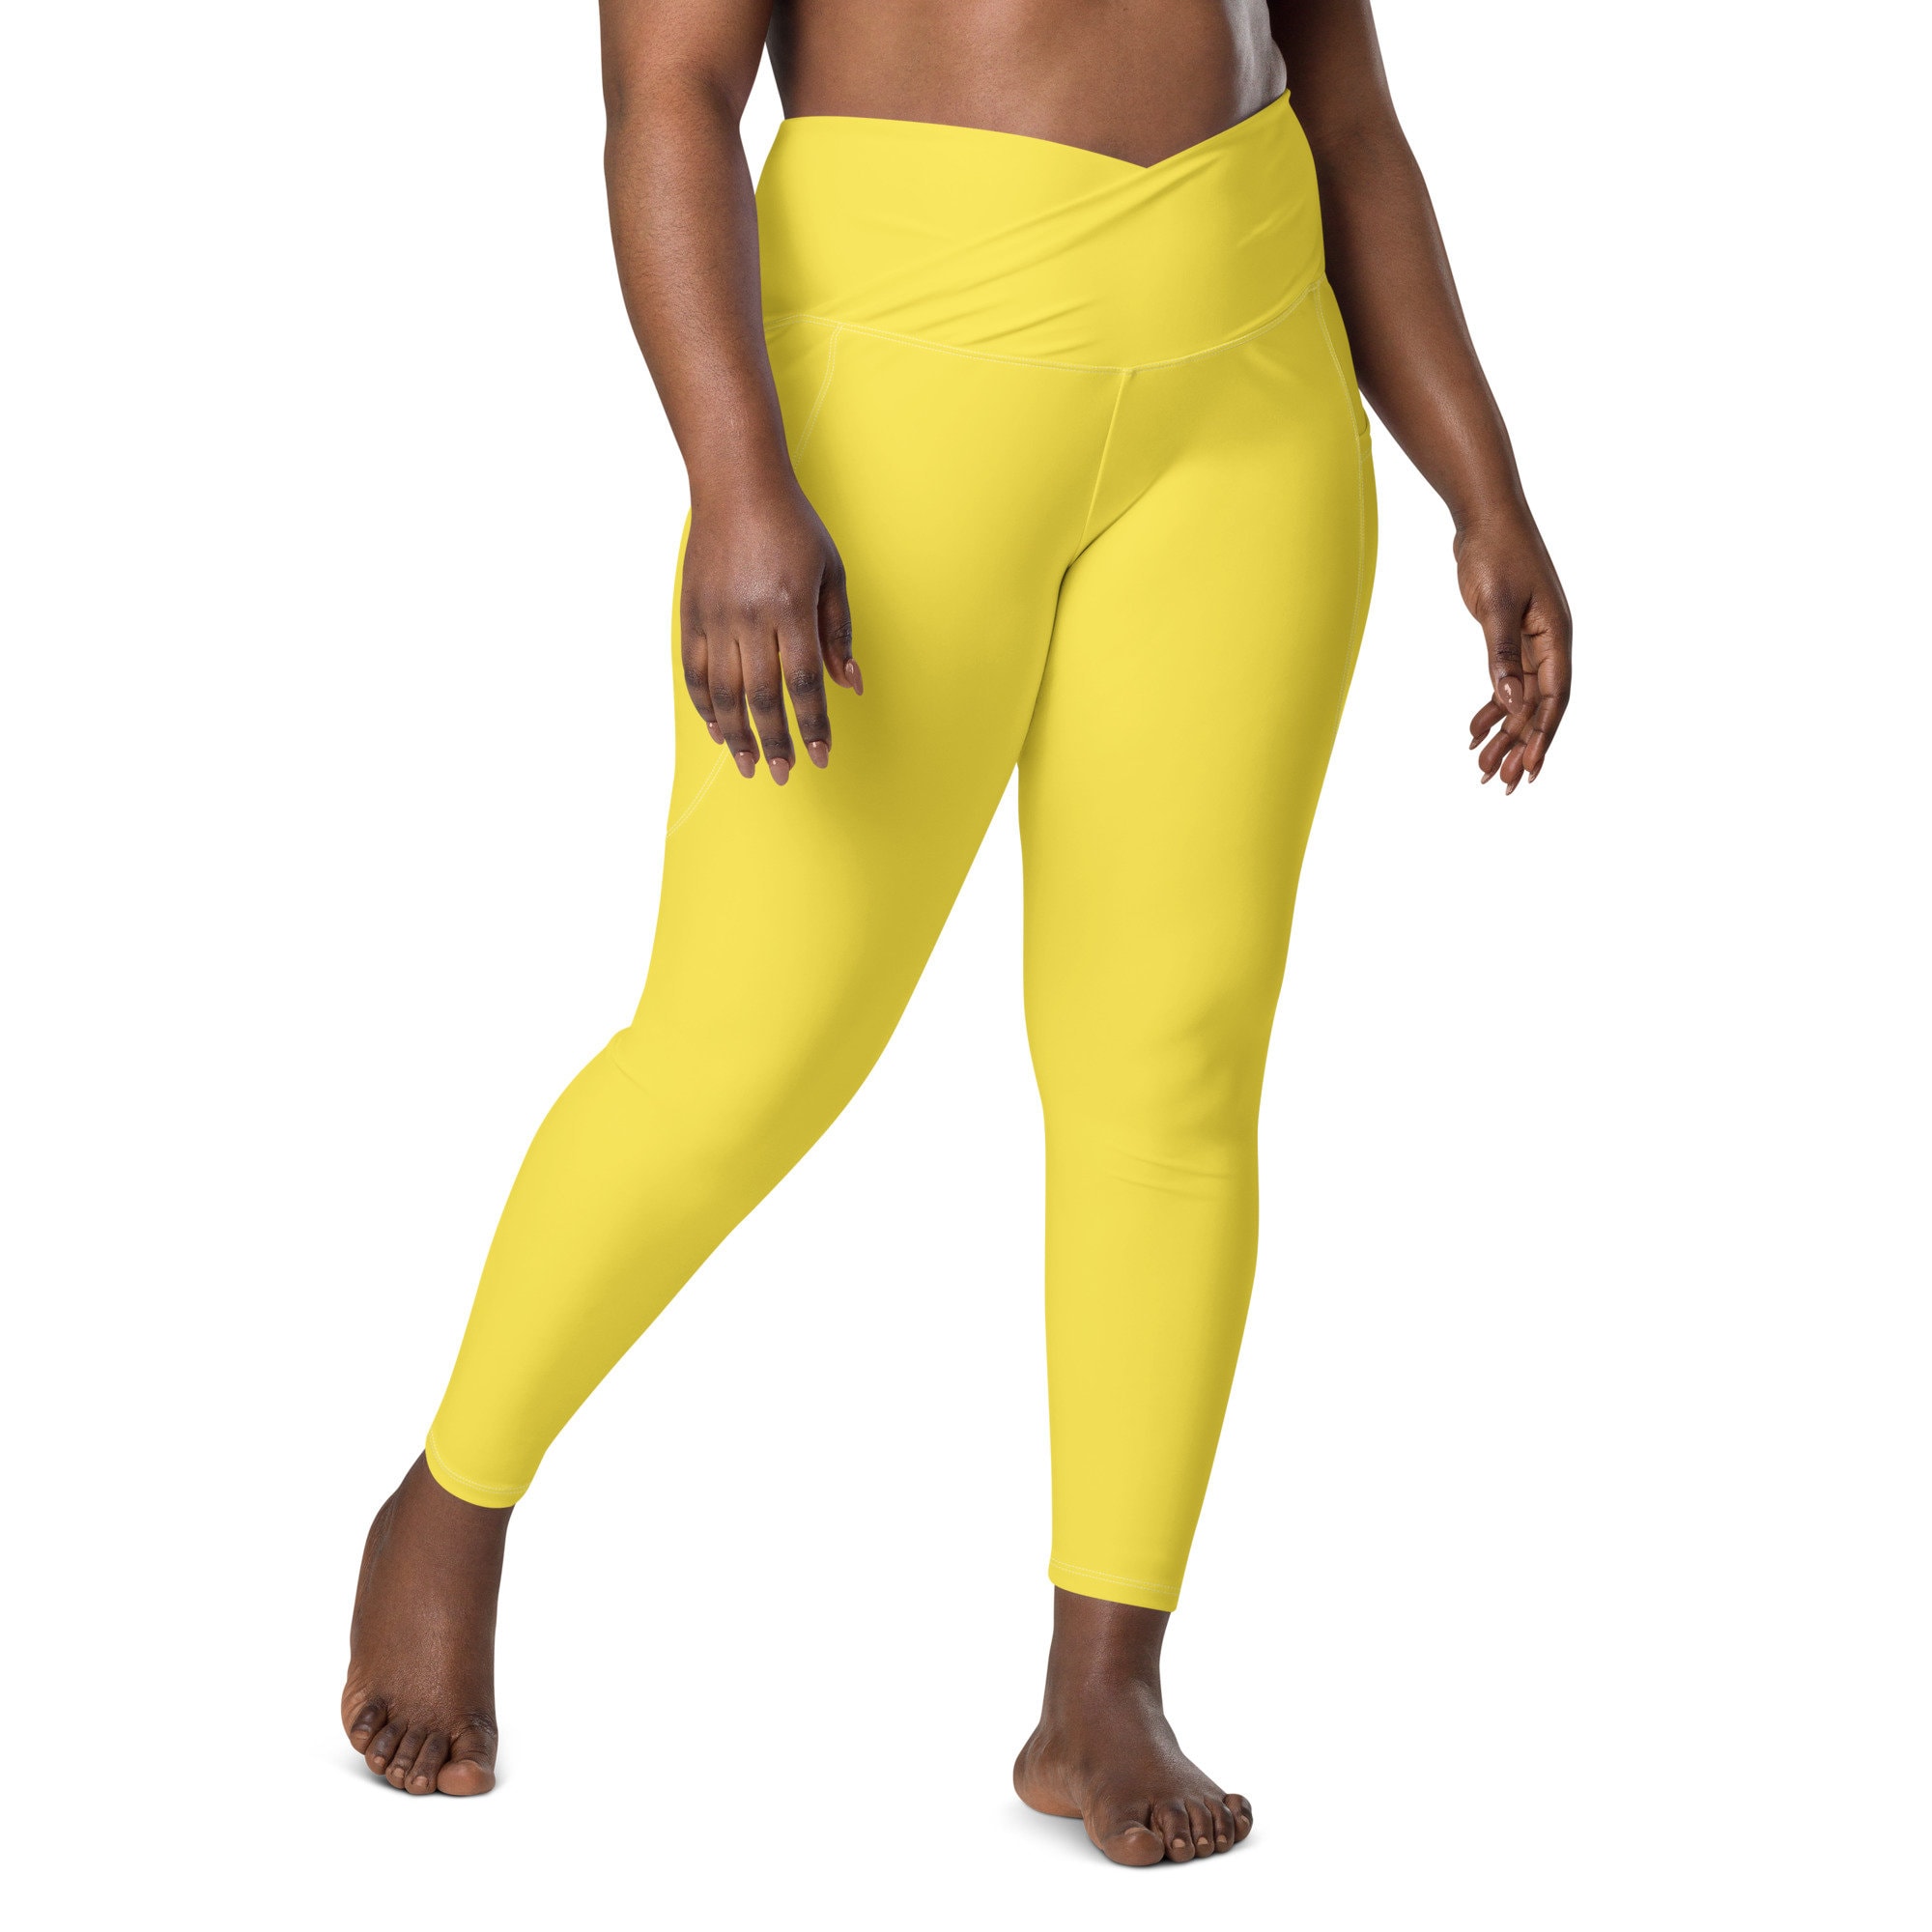 Solid Yellow Leggings for Women, Plain Yellow Leggings,high Waisted  Crossover Leggings With Pocket, Plus Size Printed Leggings,workout Pants 